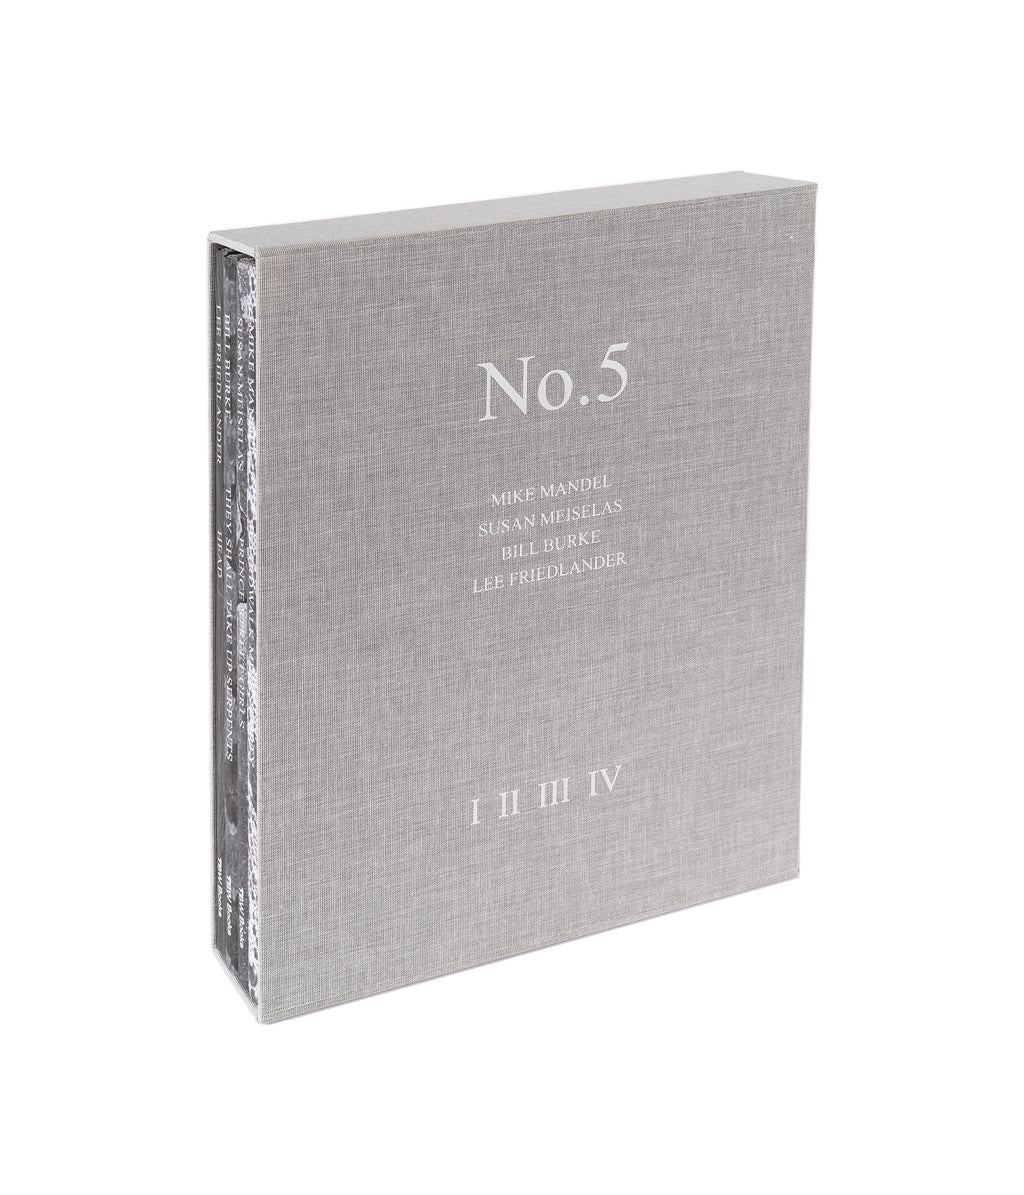 Annual Series No. 5 - Signed Slipcase Edition